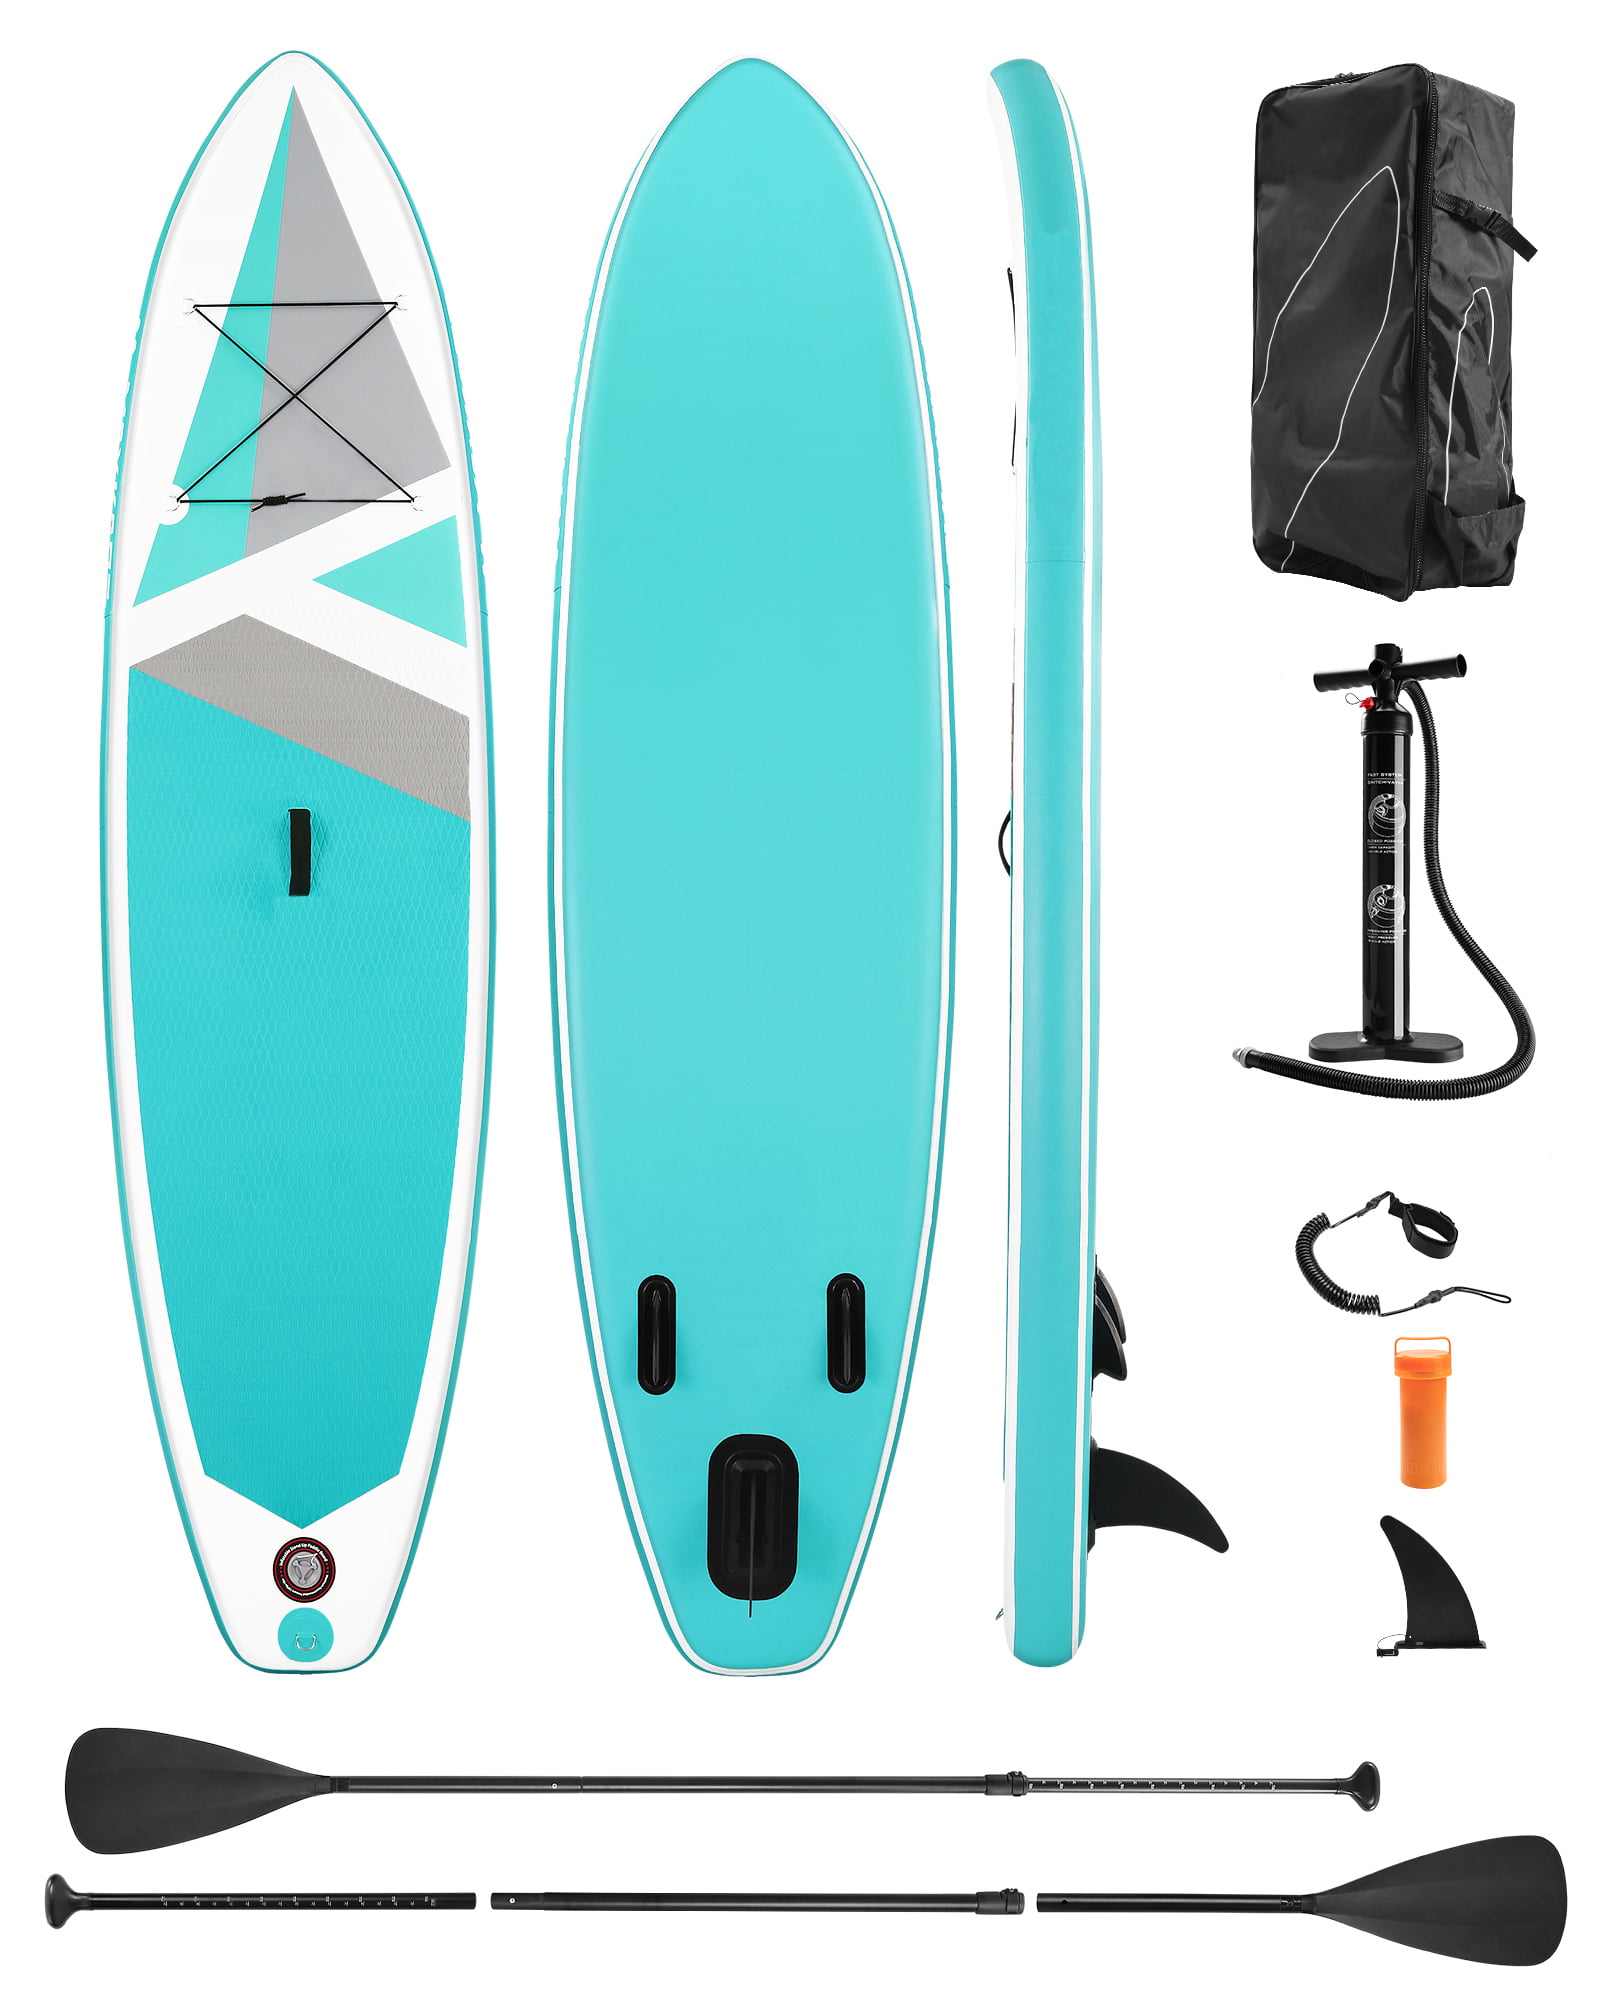 Inflatable Stand Up Paddle Board Leash Lightweight Paddleboard Non-Slip Deck with ISUP Accessories Including Carry Bag 17.9 lbs Bowdanie Inflatable SUP 10'5x 32.3x 6 Pump Fin 